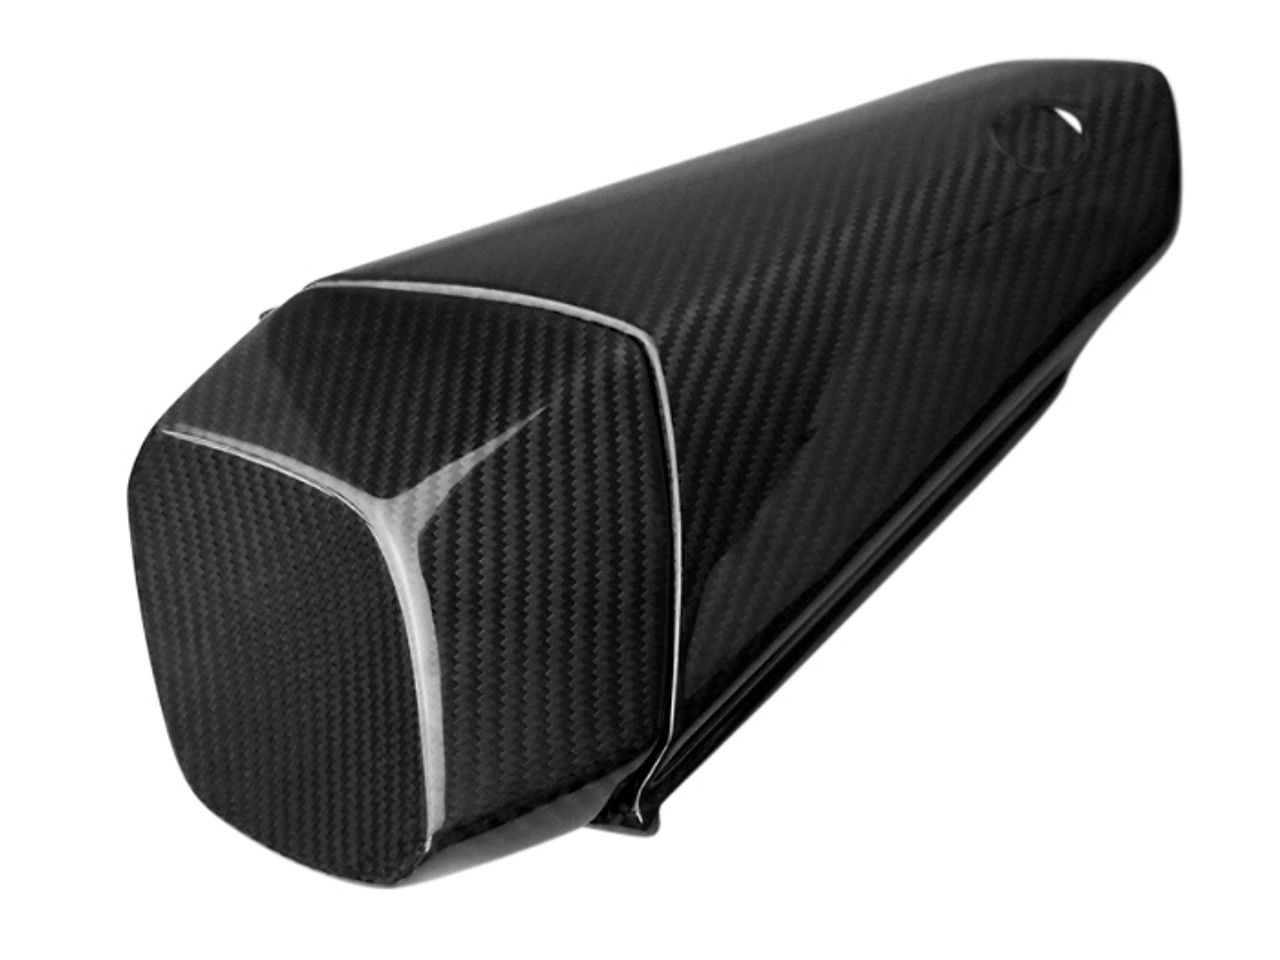 Seat Cowl w/Pad in Glossy Twill Weave Carbon Fiber for Yamaha R1 2015+